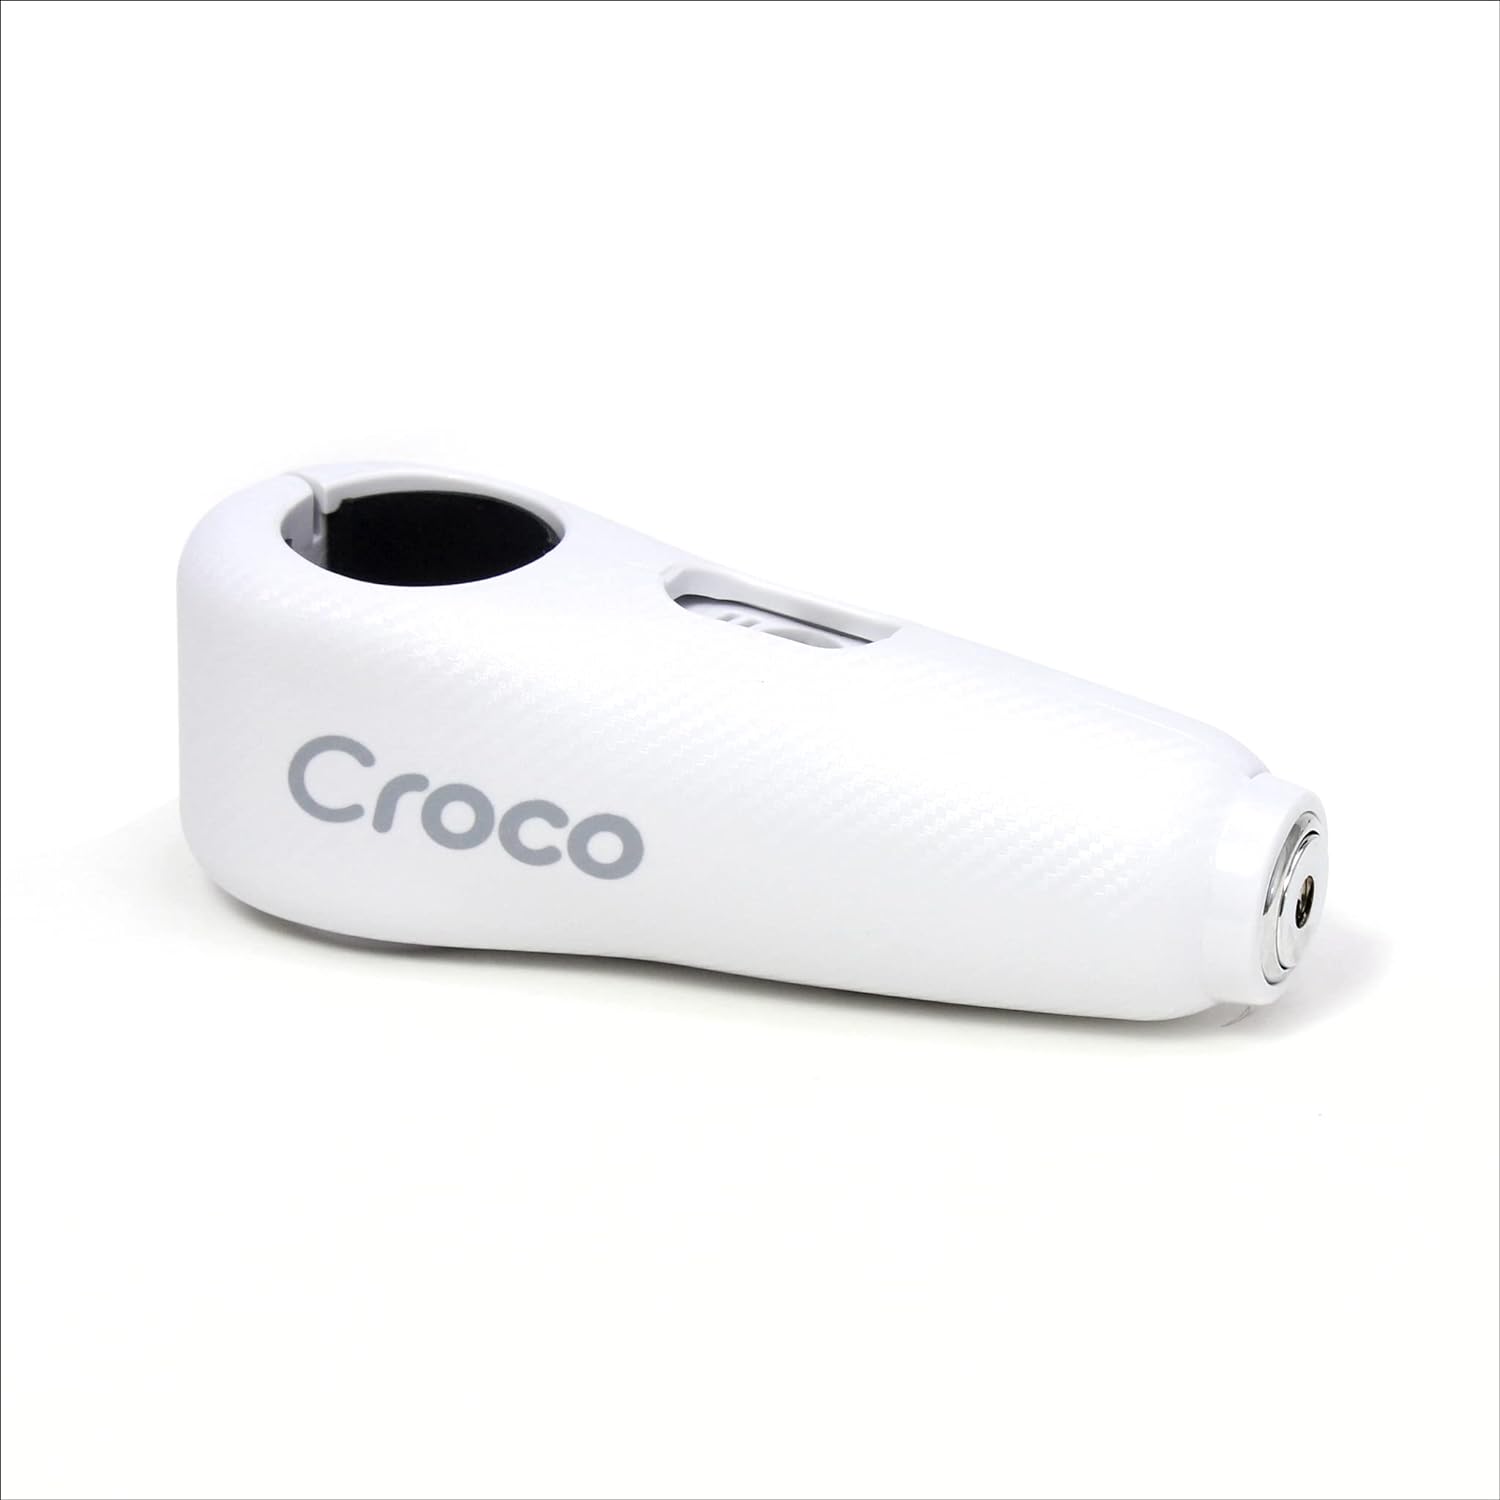 The image shows a close-up view of a white Croco lock with a carbon fiber-like texture on its surface. The lock appears robust and is branded with the Croco logo in white letters, suggesting a focus on strong visual branding. The keyhole is at one end of the lock, hinting at a high-security cylinder mechanism. The design is sleek and modern, and the overall impression is that of a sturdy, reliable lock for securing valuable items